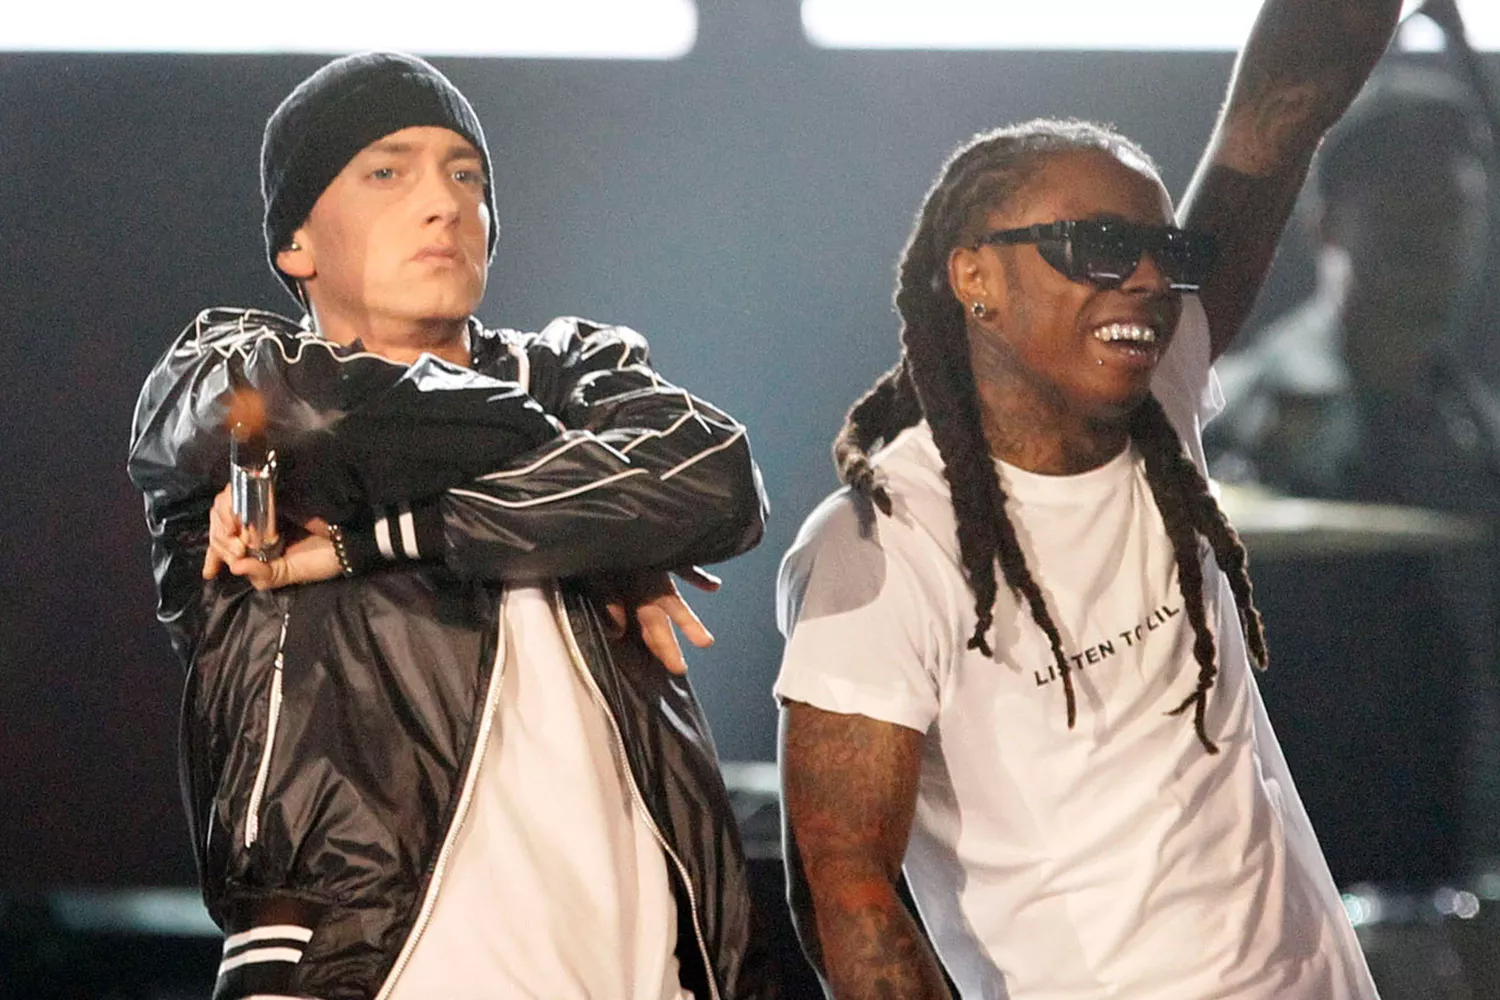 Eminem and Lil Wayne perform together during the Grammy show. 52nd Annual GRAMMYÃÂ¨ Awards January 31, 2010